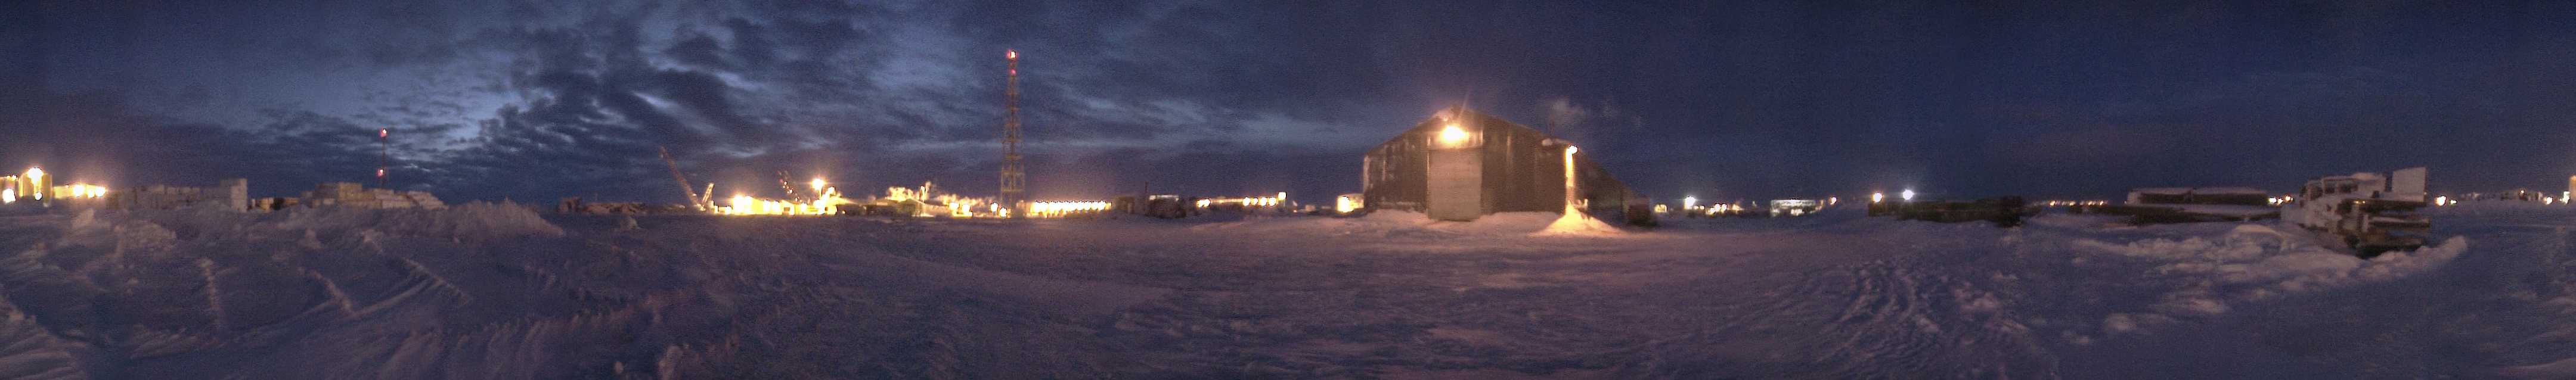 Panorama of the deployment site at Prudhoe Bay, Alaska